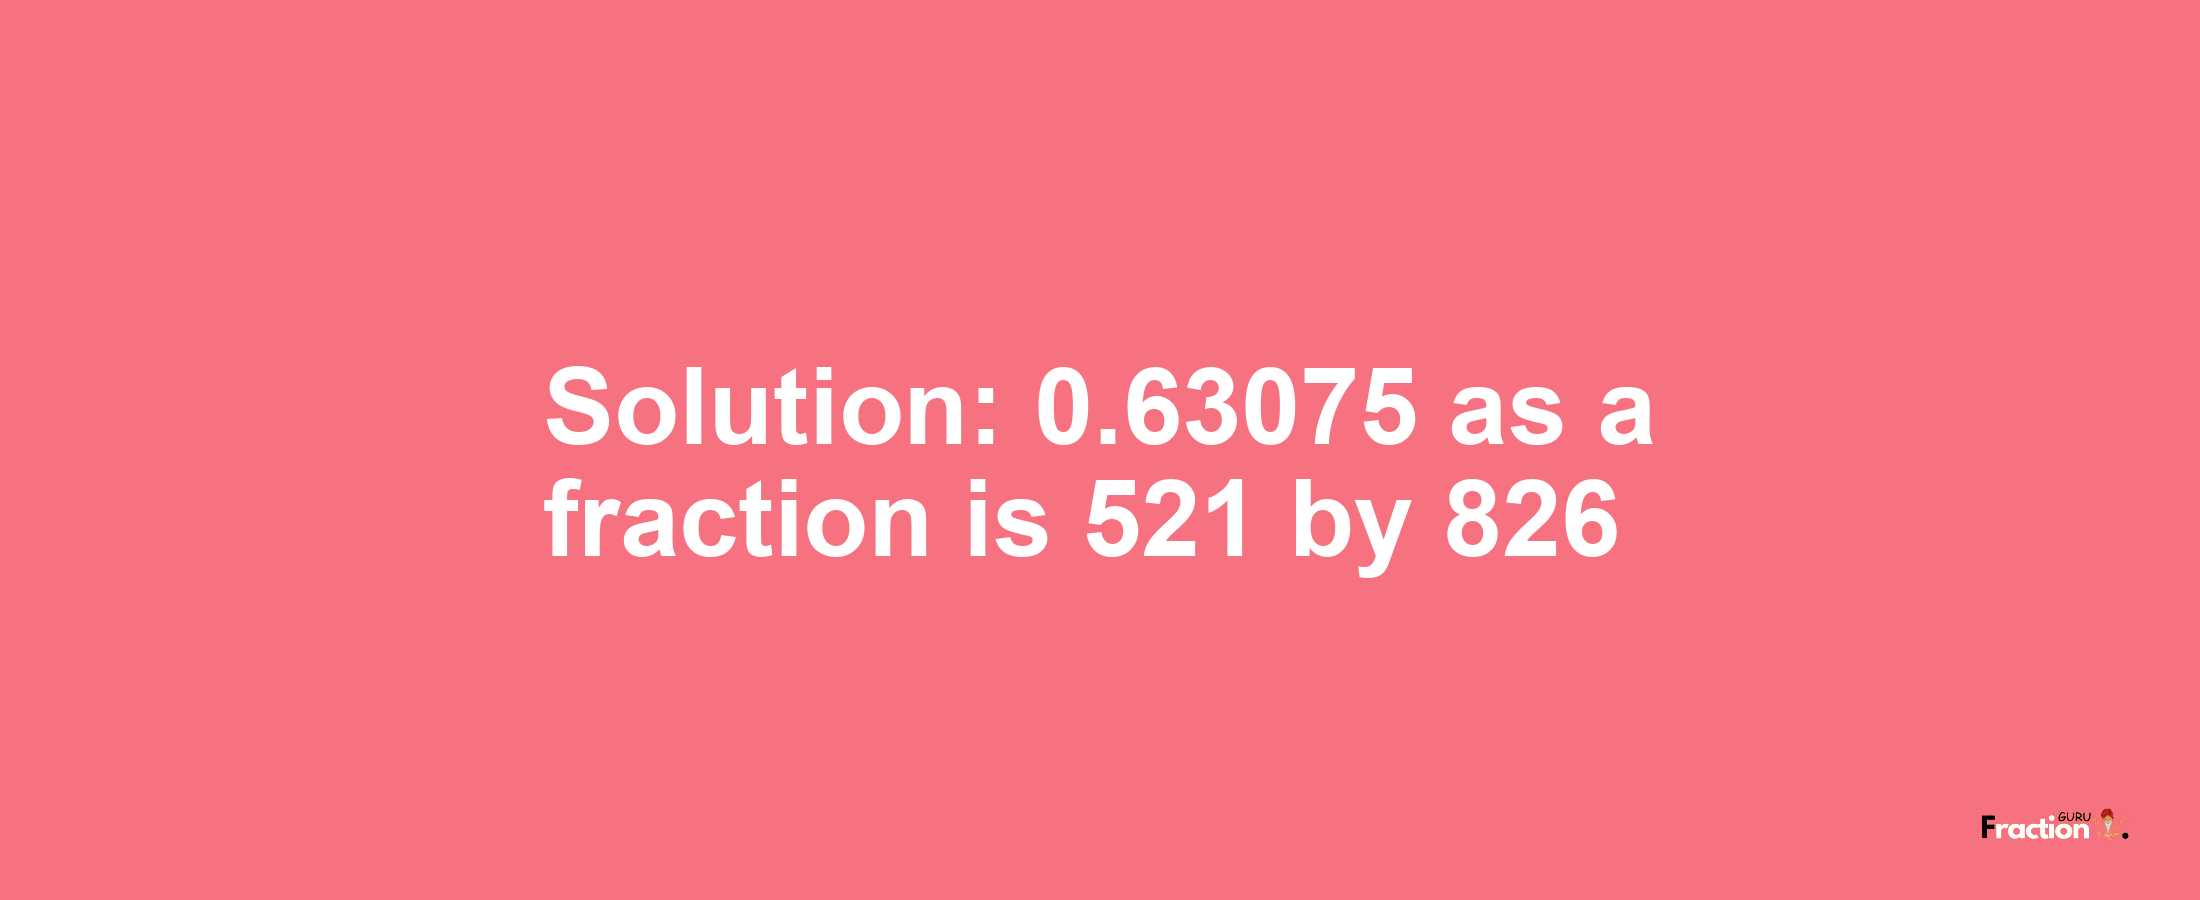 Solution:0.63075 as a fraction is 521/826